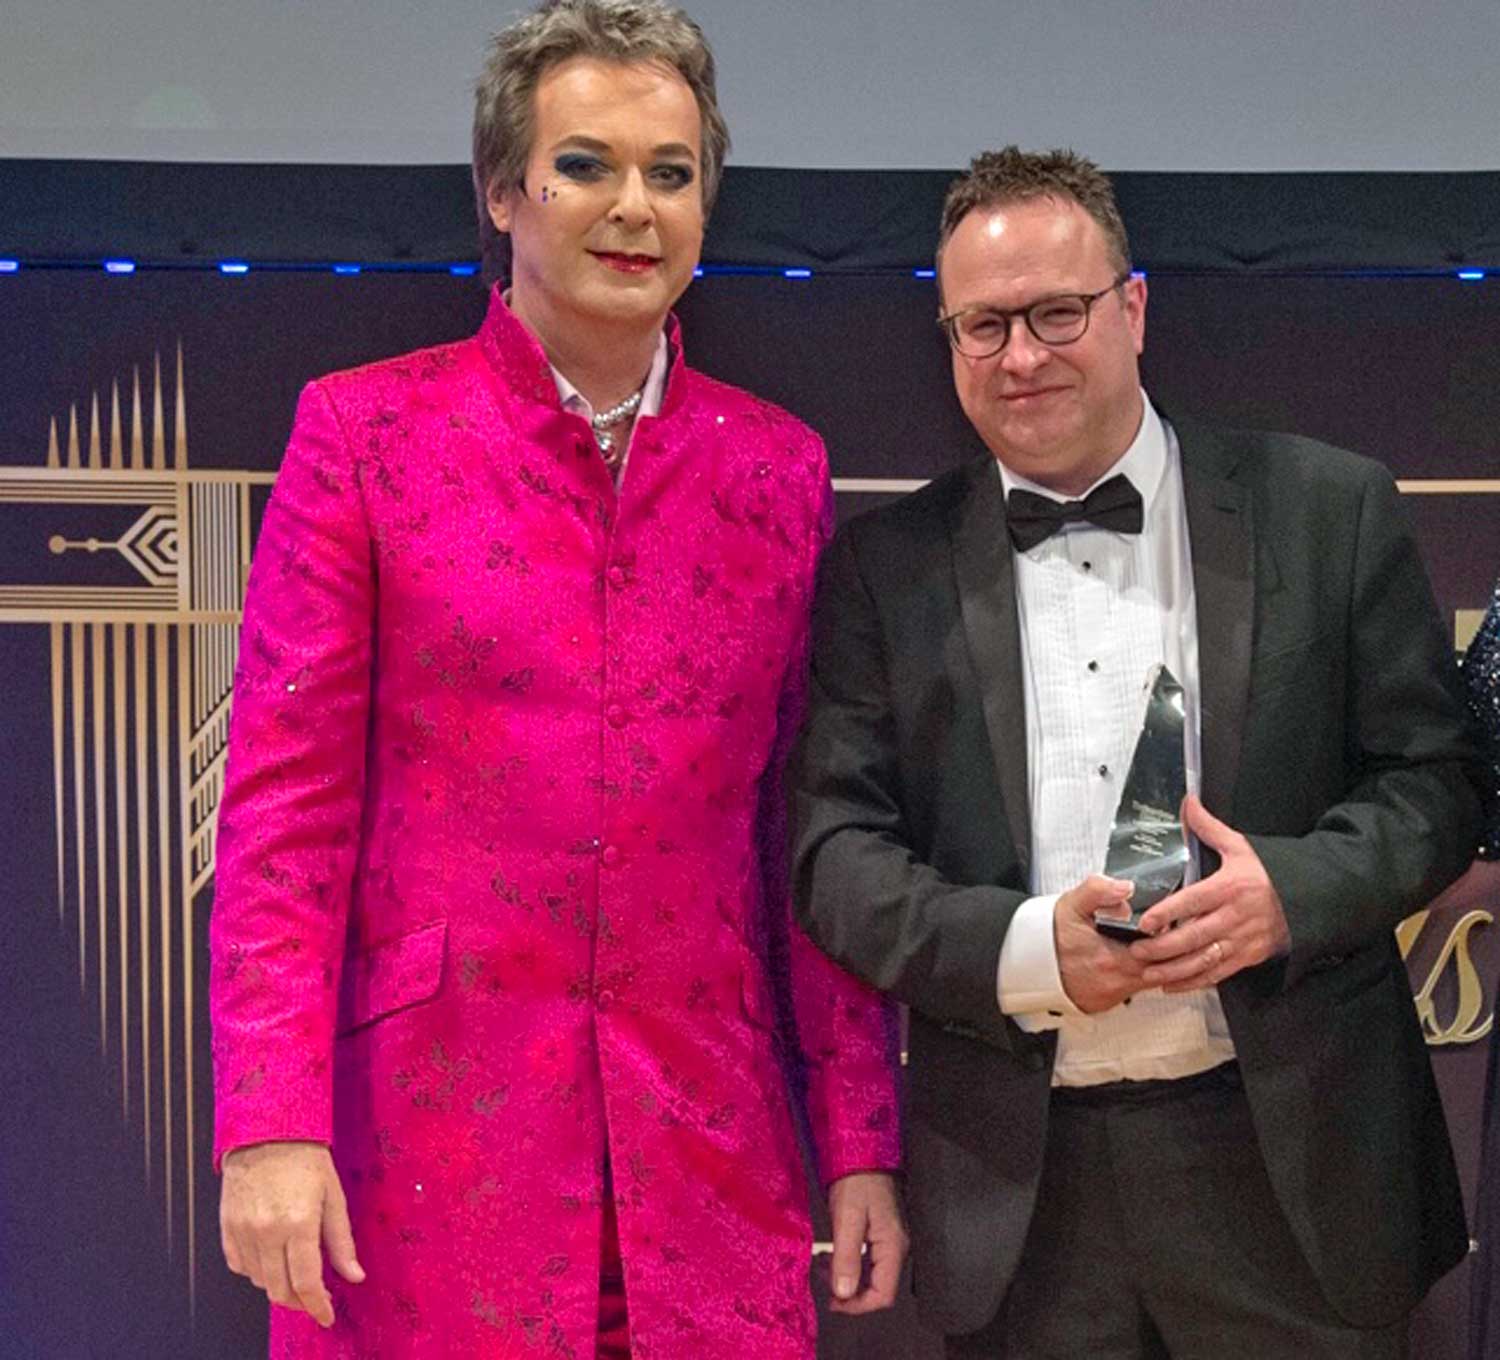 David Waddington, Land and New Homes Director at Linley & Simpson, picks up the Community Champion gold award on behalf of the agency from comic Julian Clary